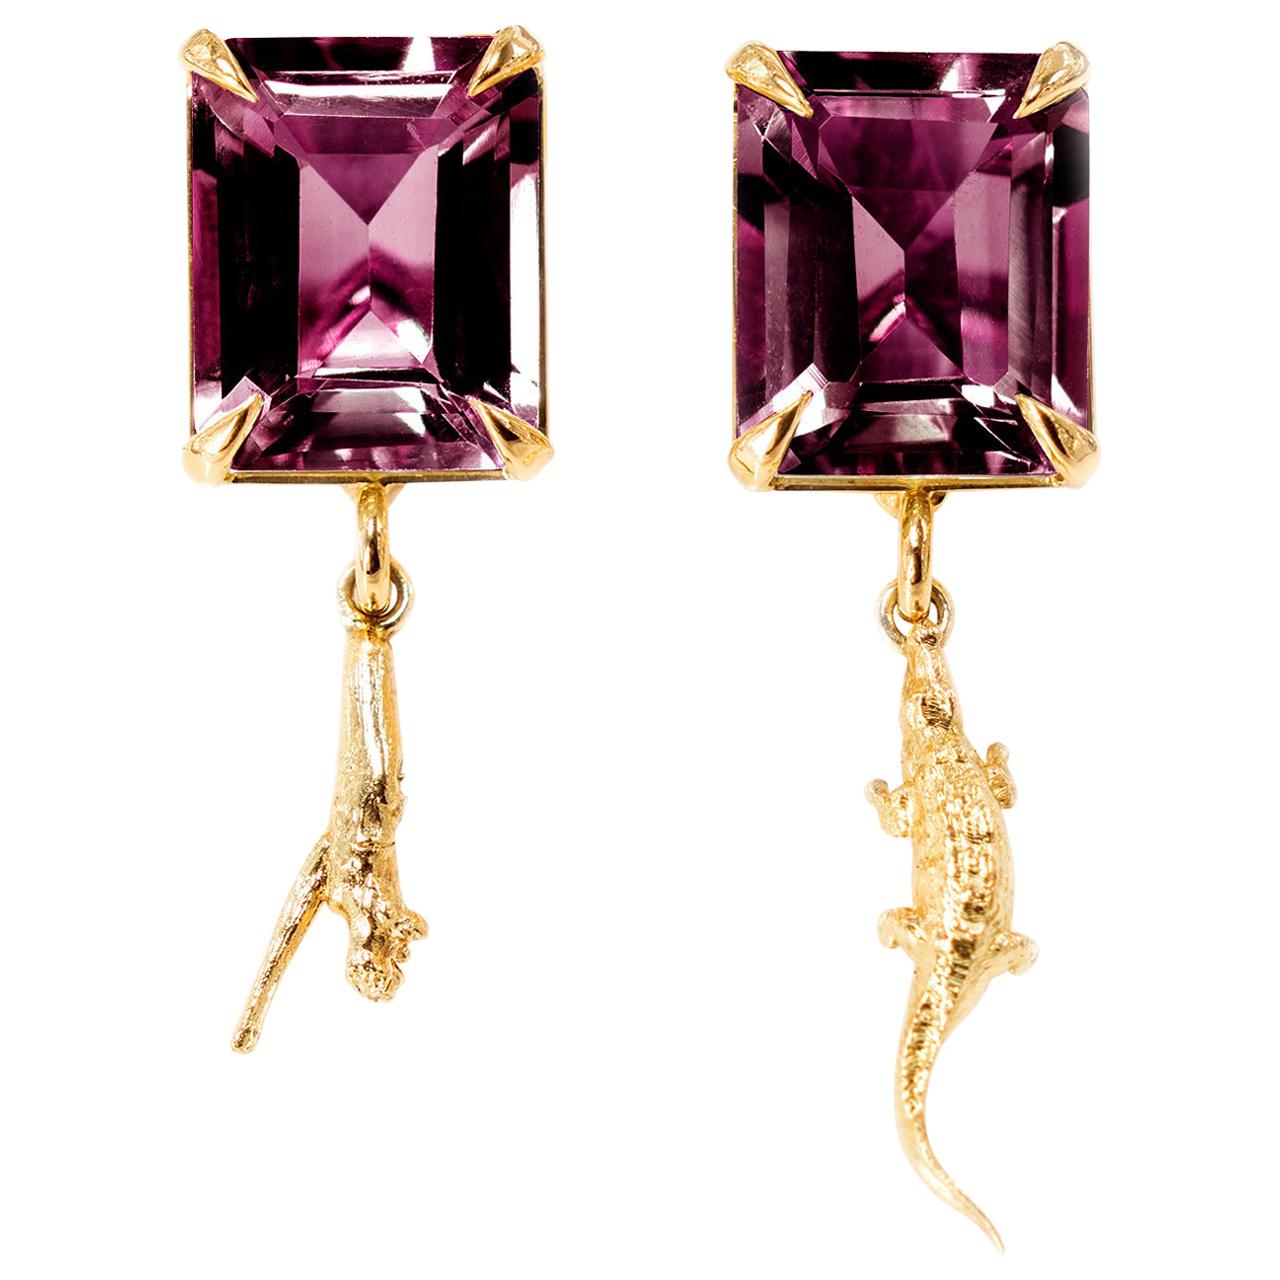 Eighteen Karat Yellow Gold Contemporary Stud Earrings with Pink Rubies